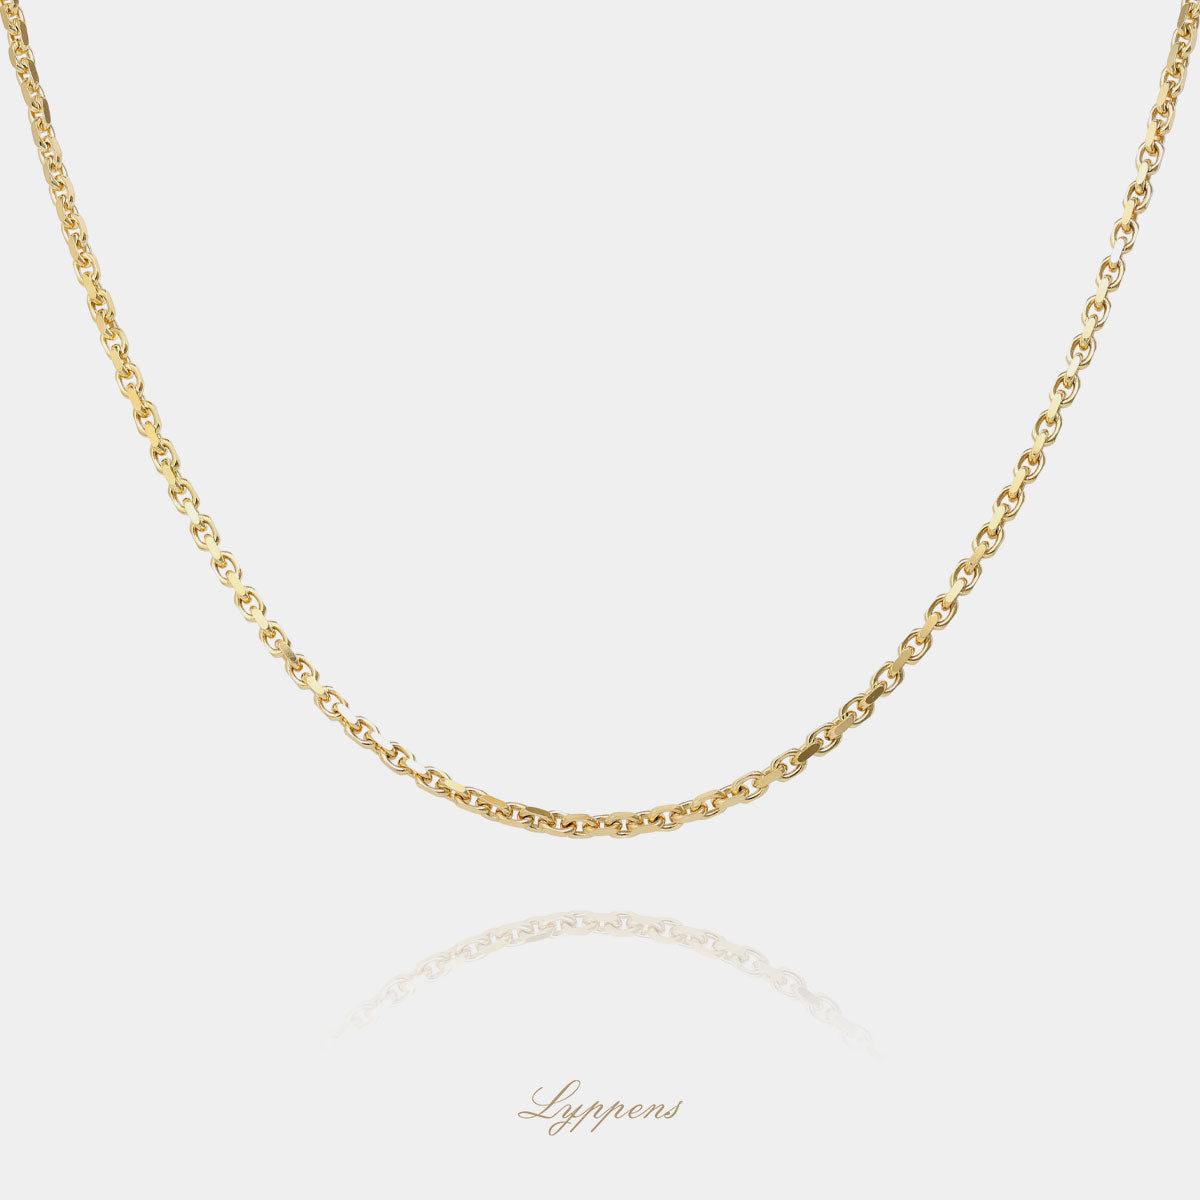 Yellow gold anchor link necklace